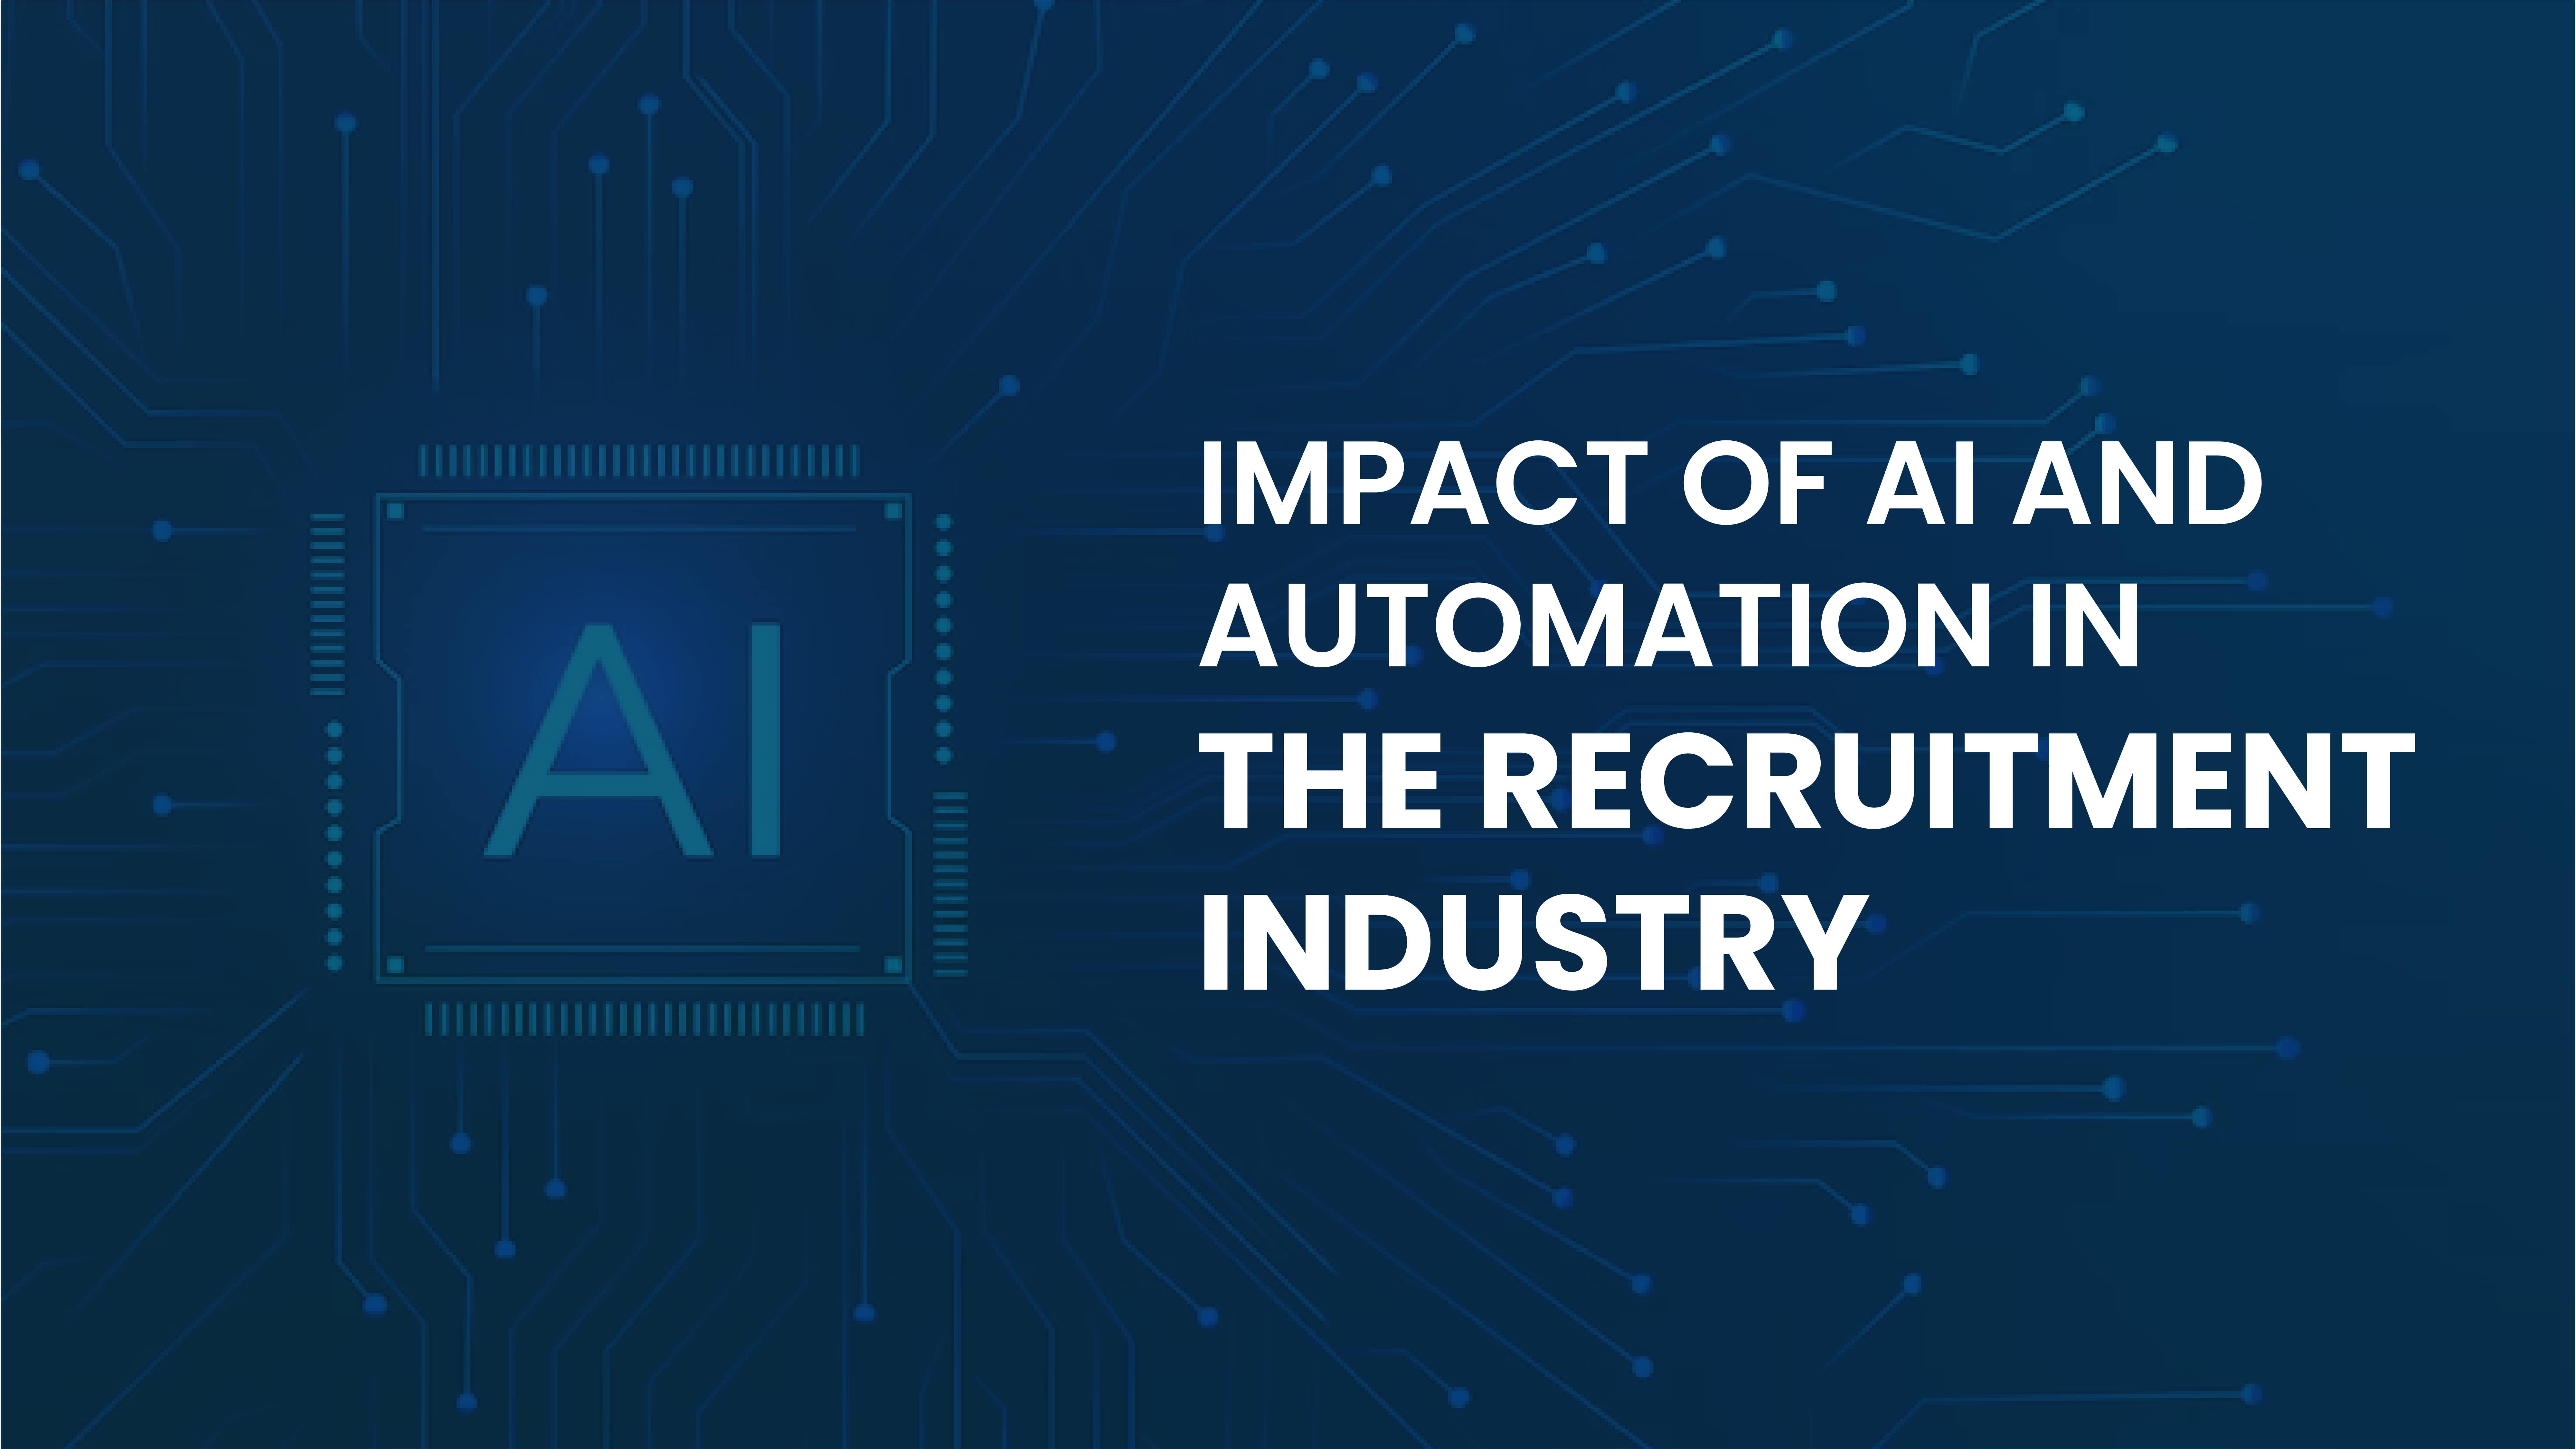 Impact of AI and automation in the recruitment industry